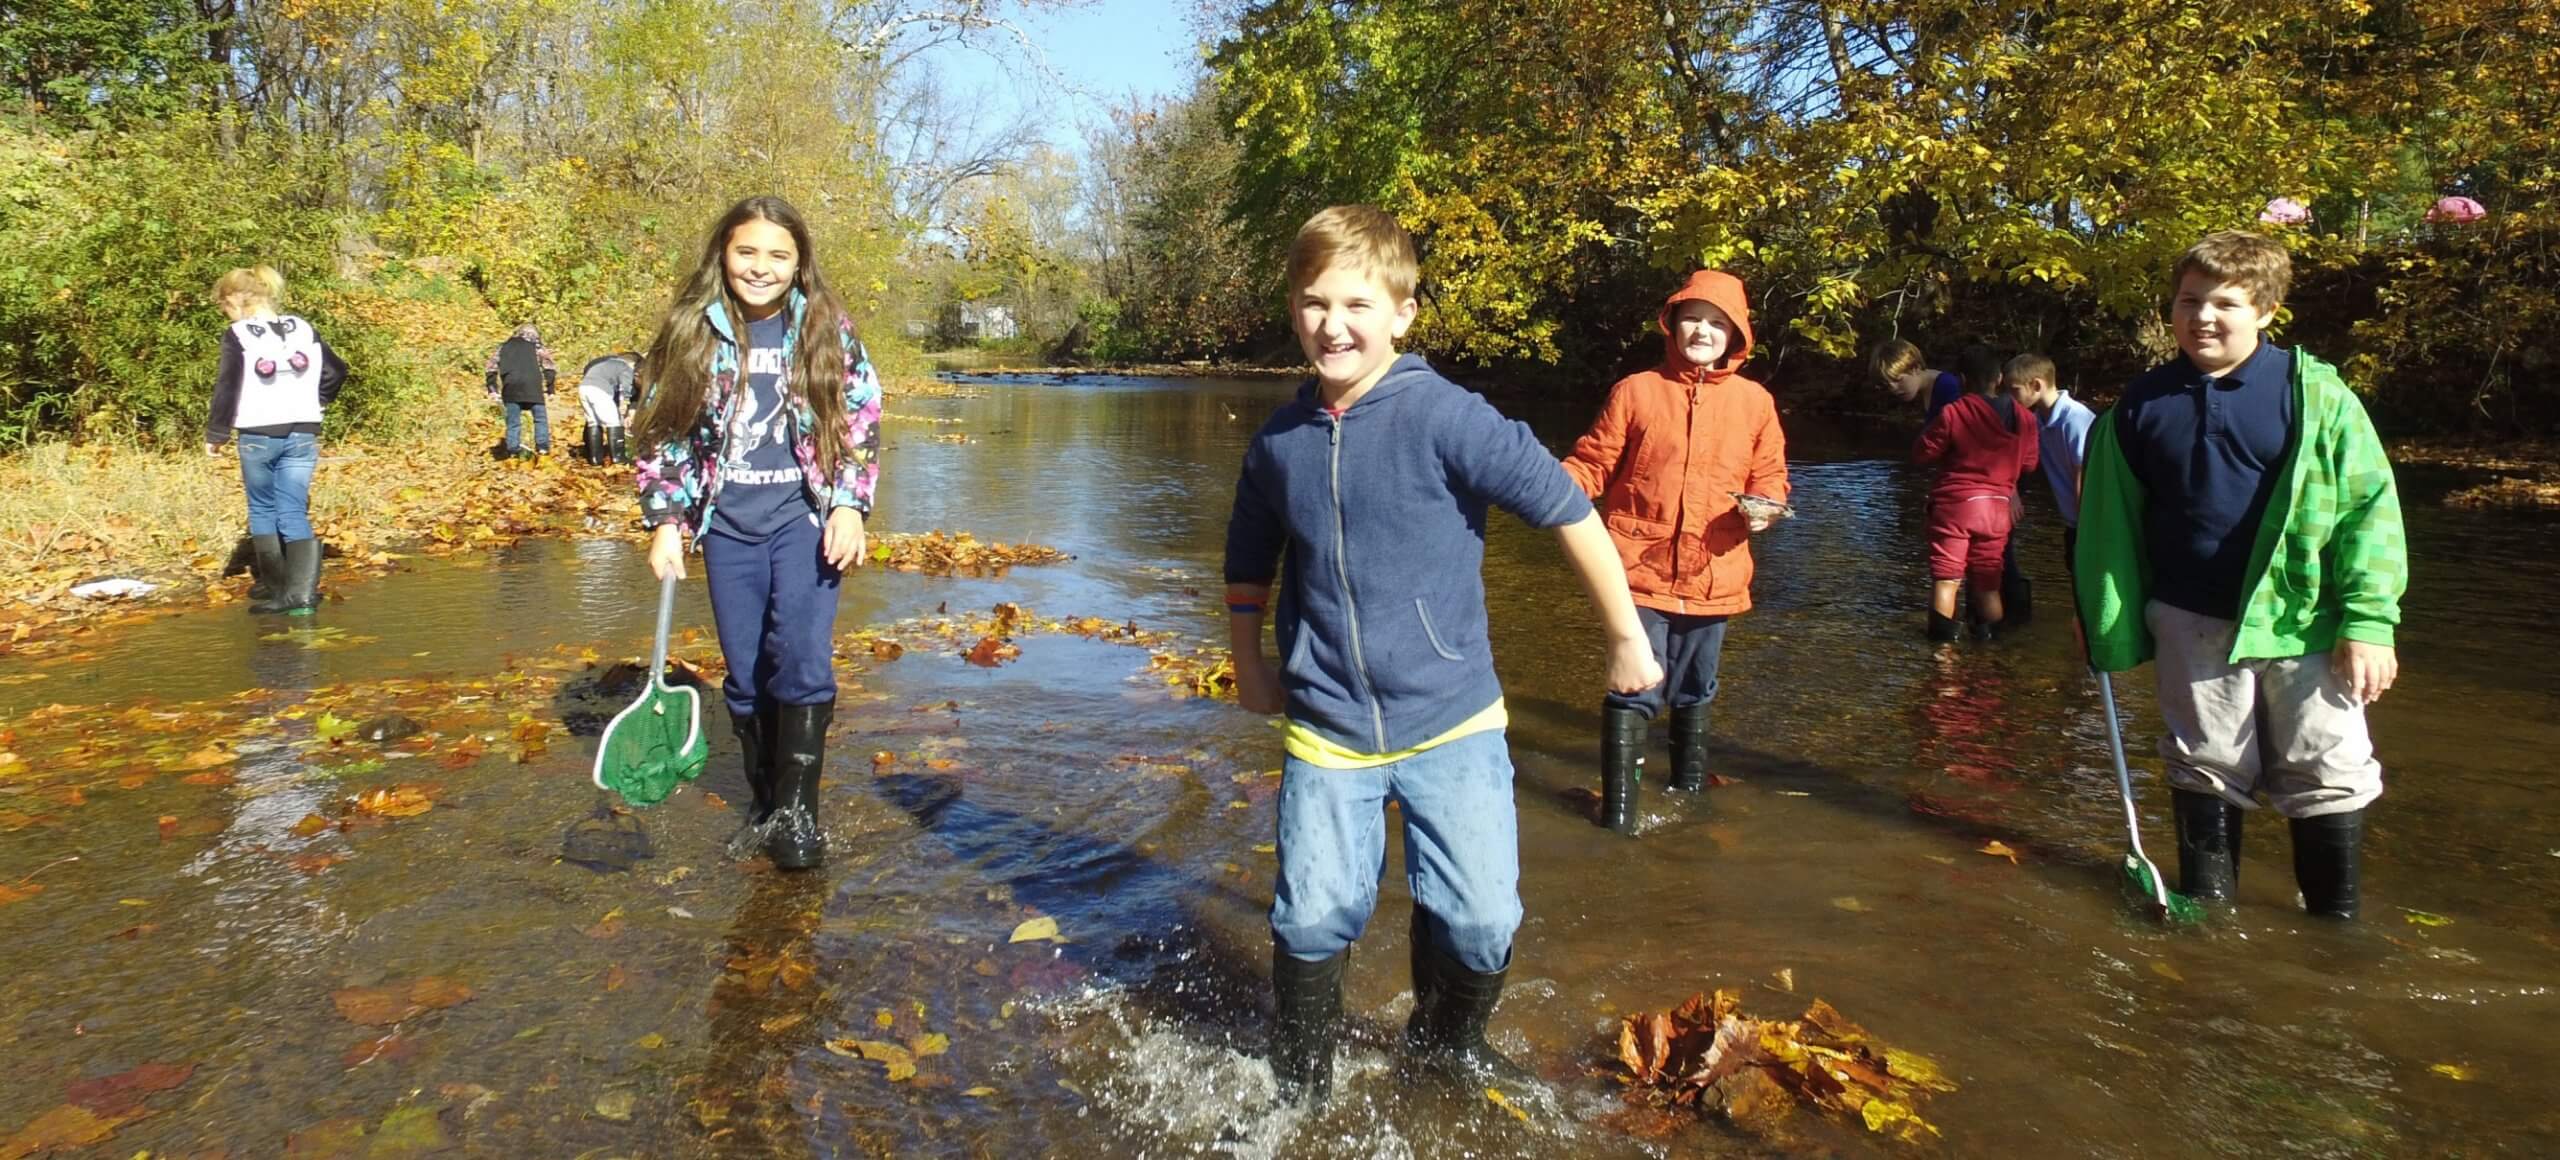 A group of children smile while playing in a creek.